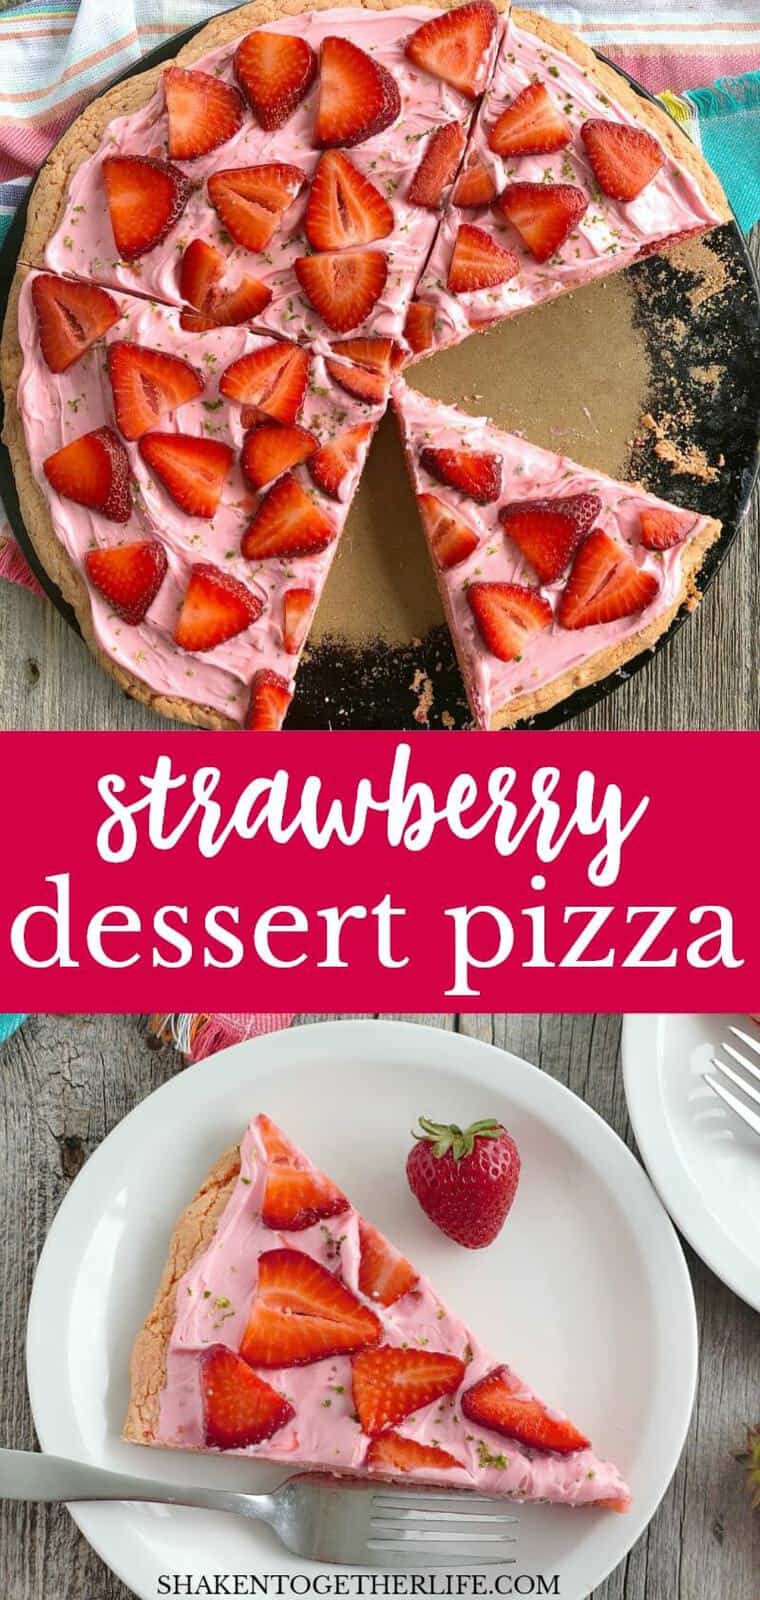 Strawberry Dessert Pizza (from a Cake Mix!) is my favorite simple dessert! A simple strawberry cookie base is topped with strawberry frosting, fresh strawberries and a pop of lime zest! Just bake, slice and serve!